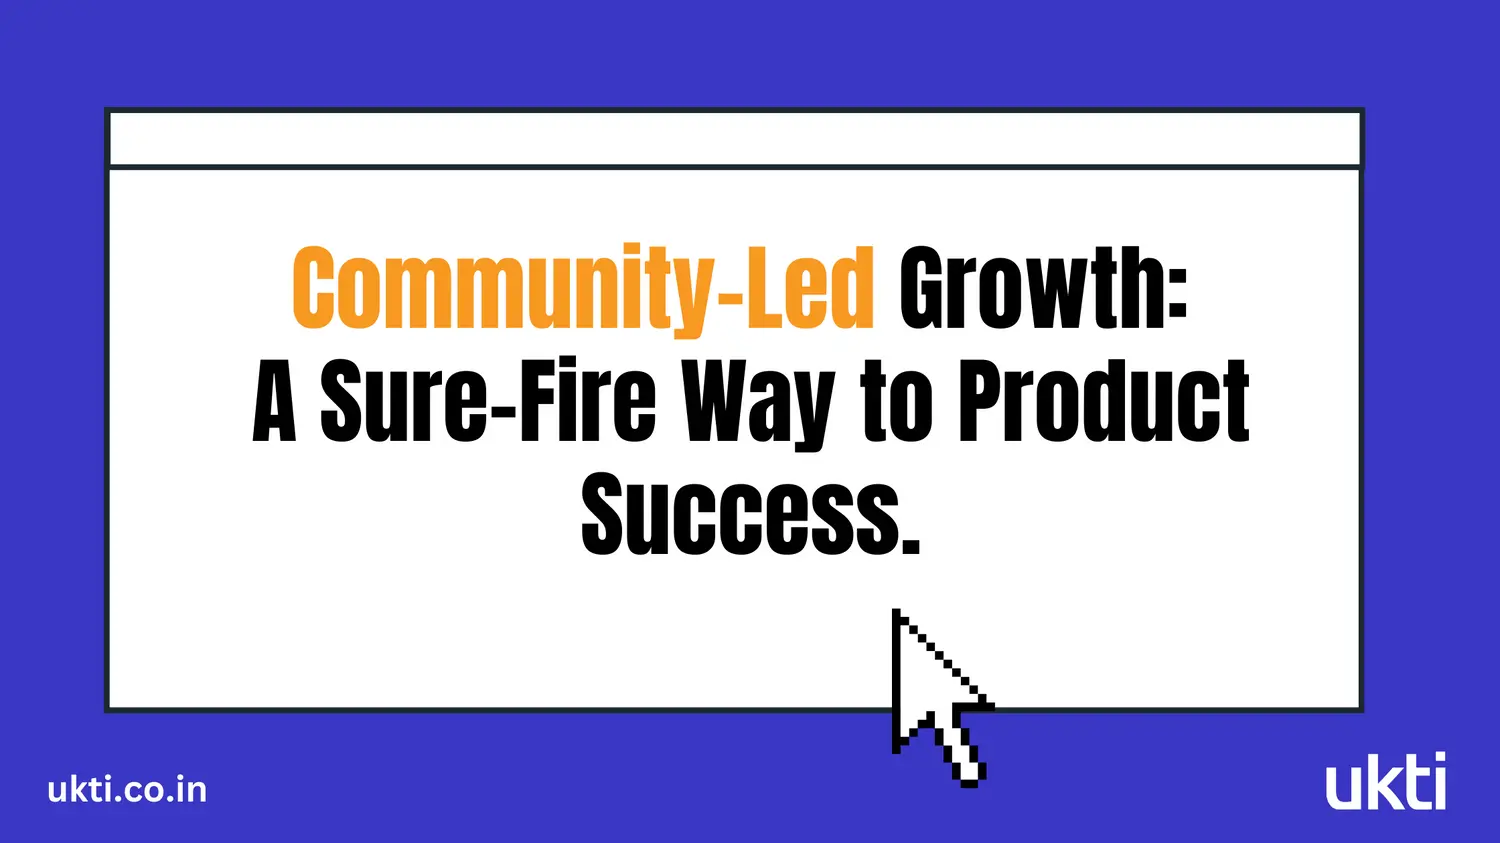 What is community-led growth